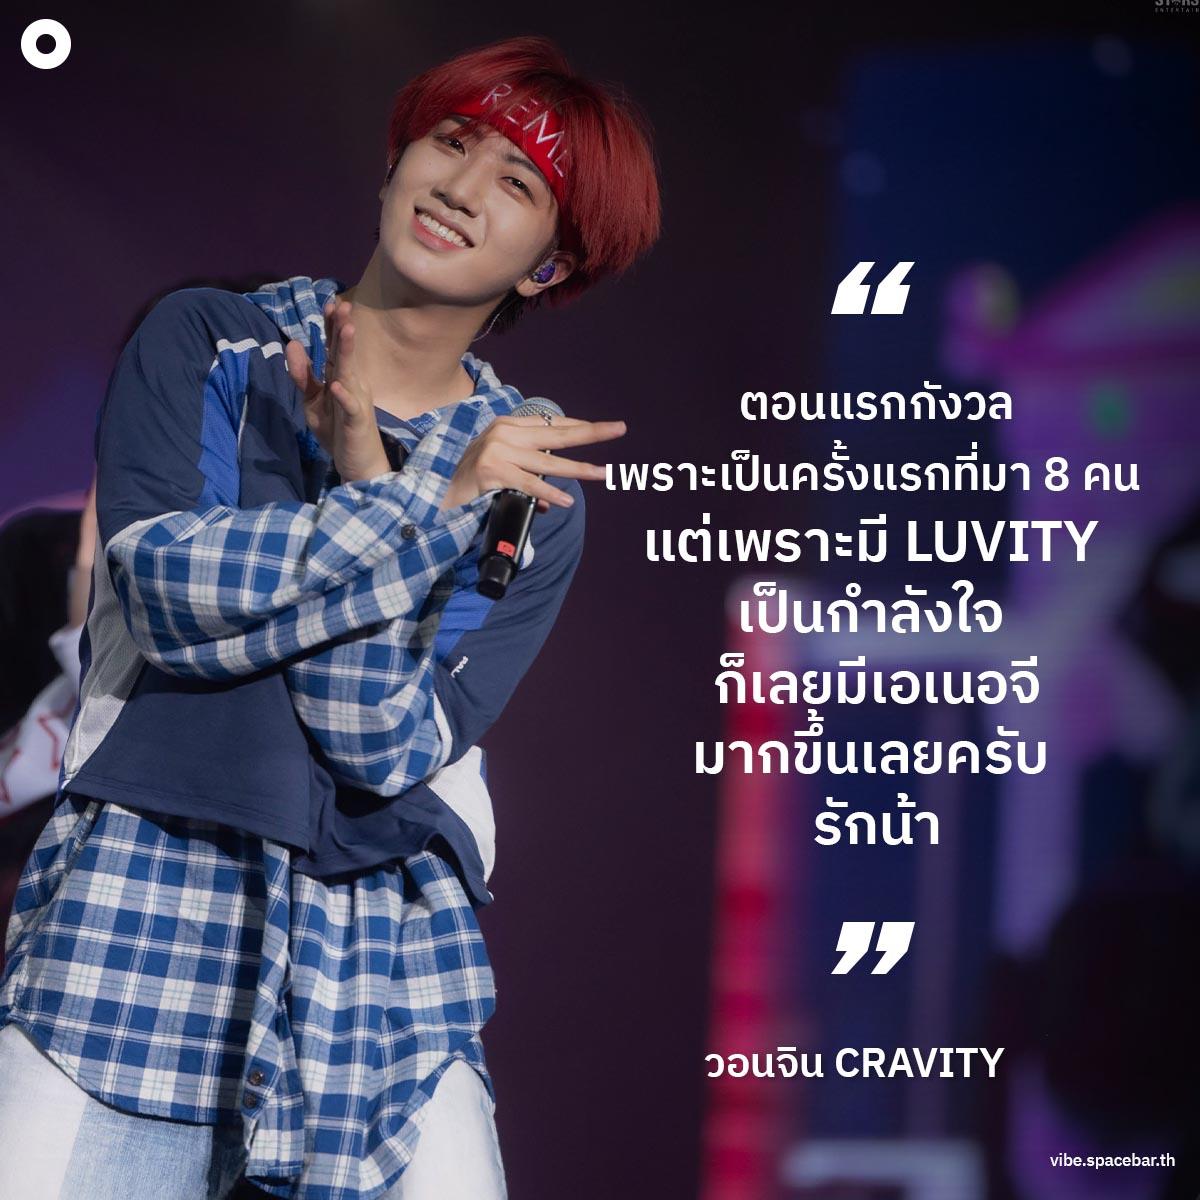 Think-thing-messages-from-cravity-to-thai-luvity-SPACEBAR-Photo05.jpg